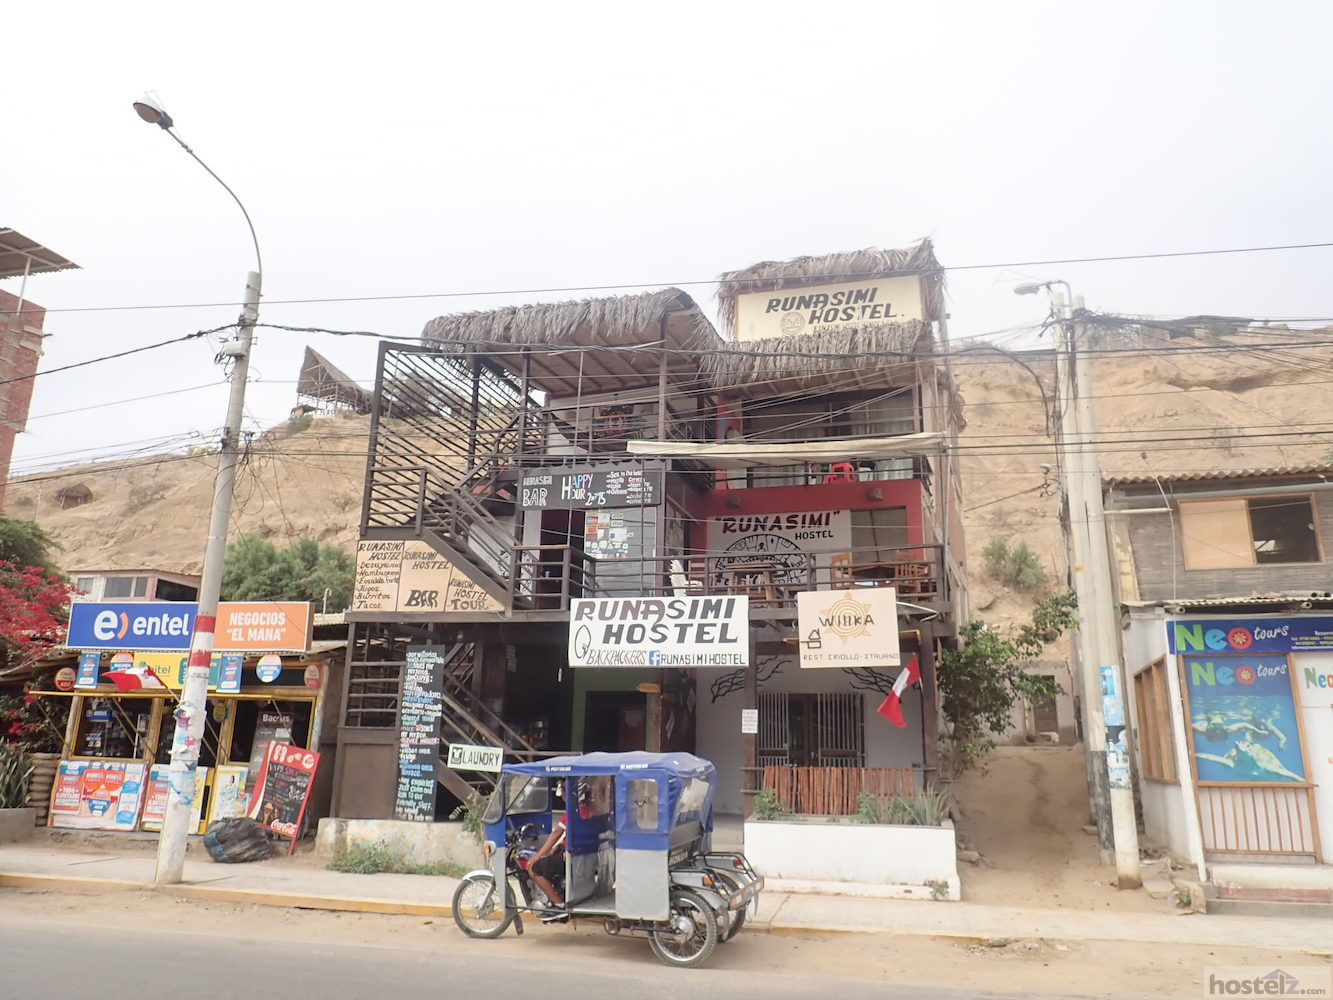 View of hostel from street